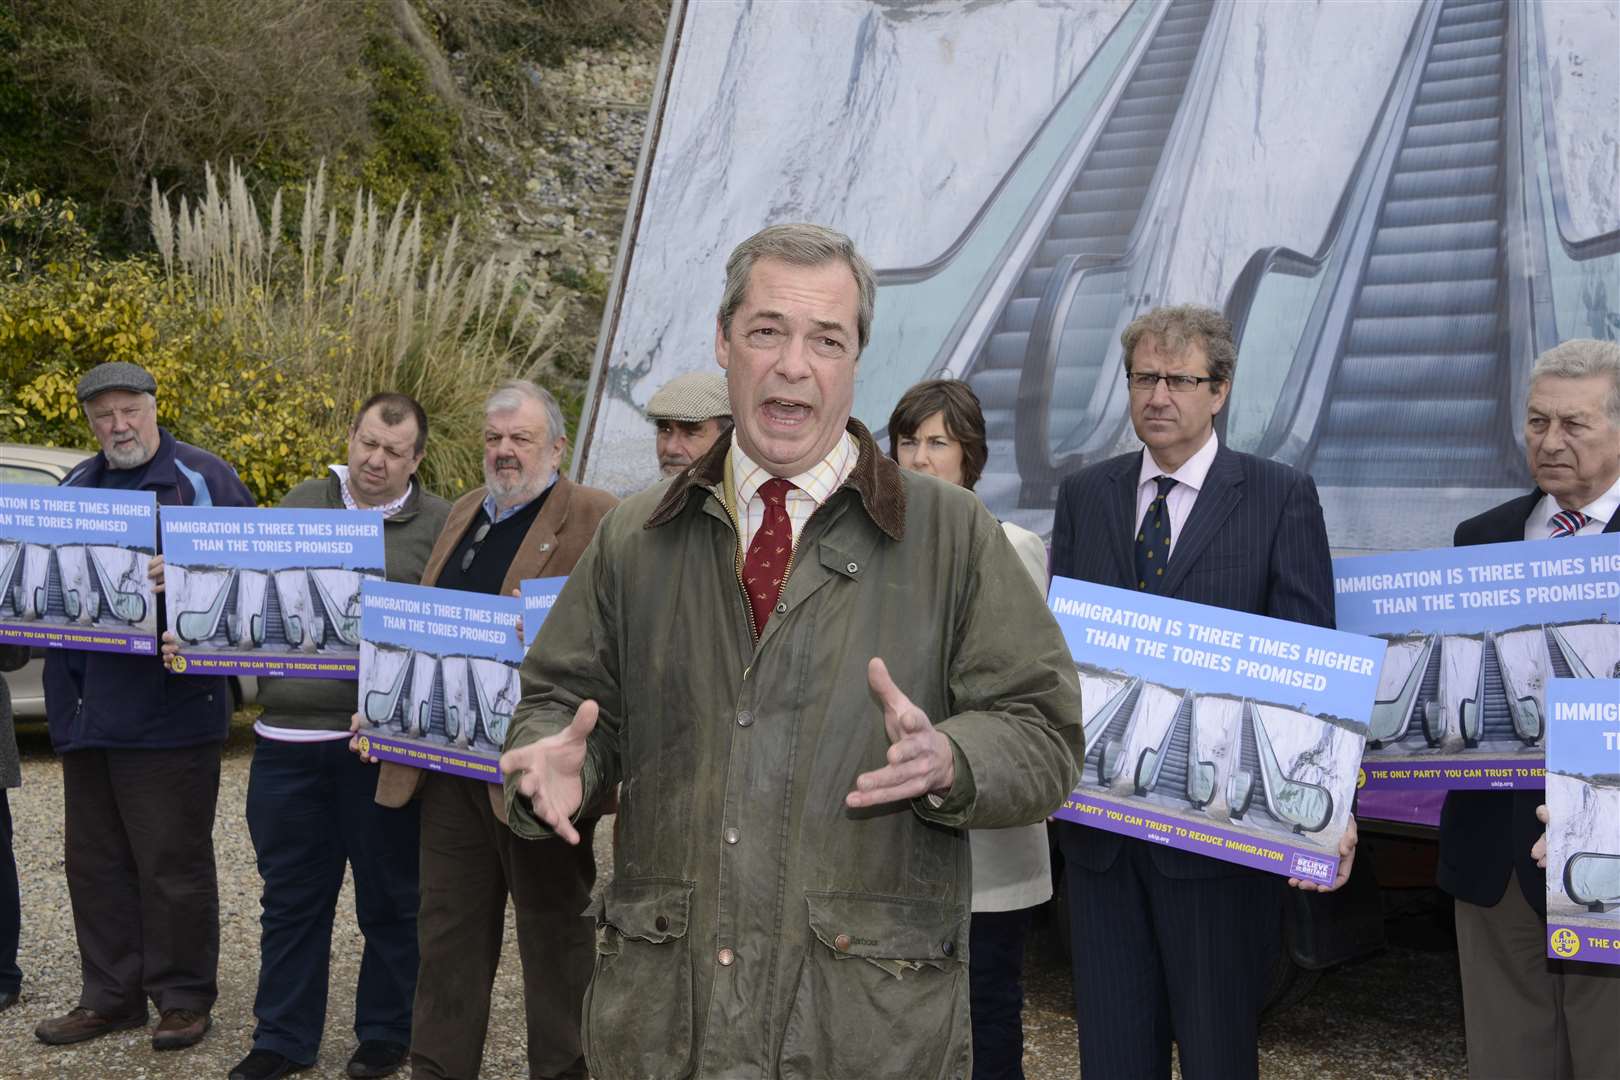 Nigel Farage kicks off his election campaign in Dover